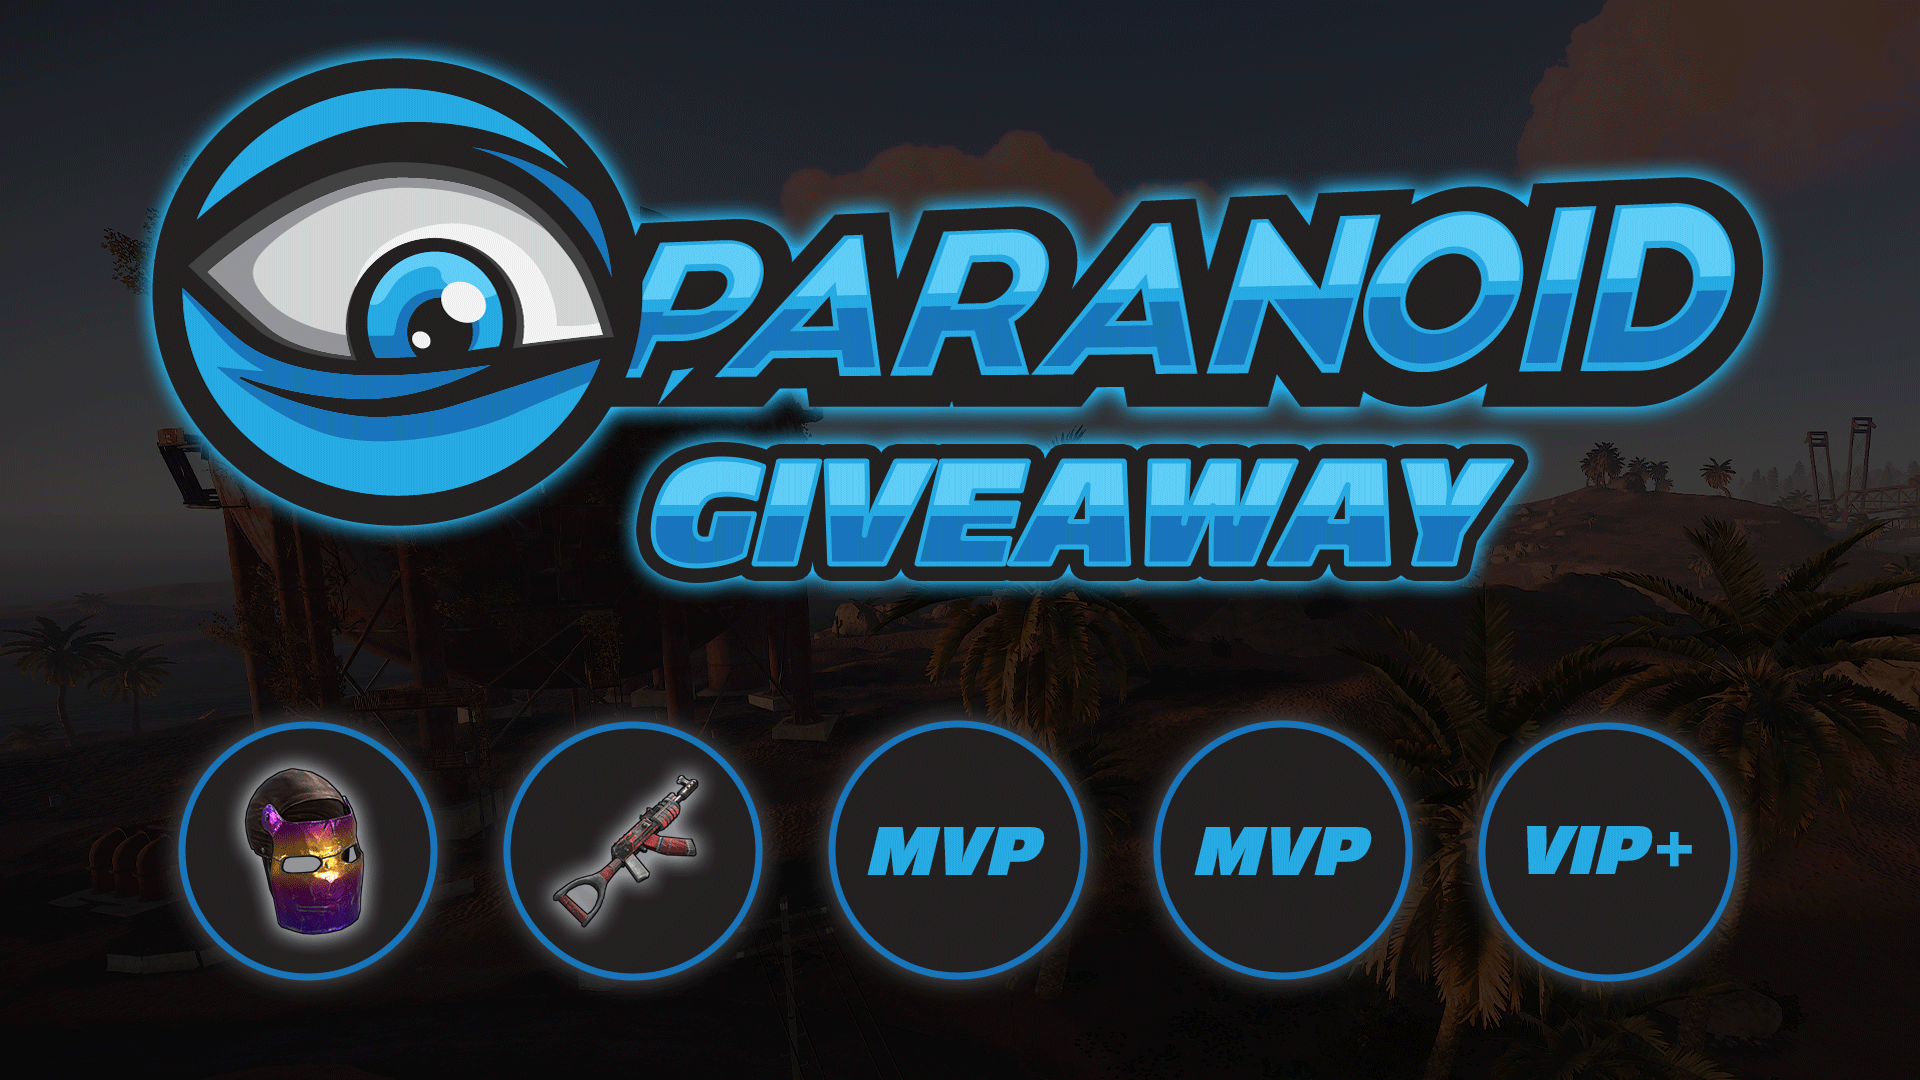 Paranoid-Giveaway-Poster-08-19-v3